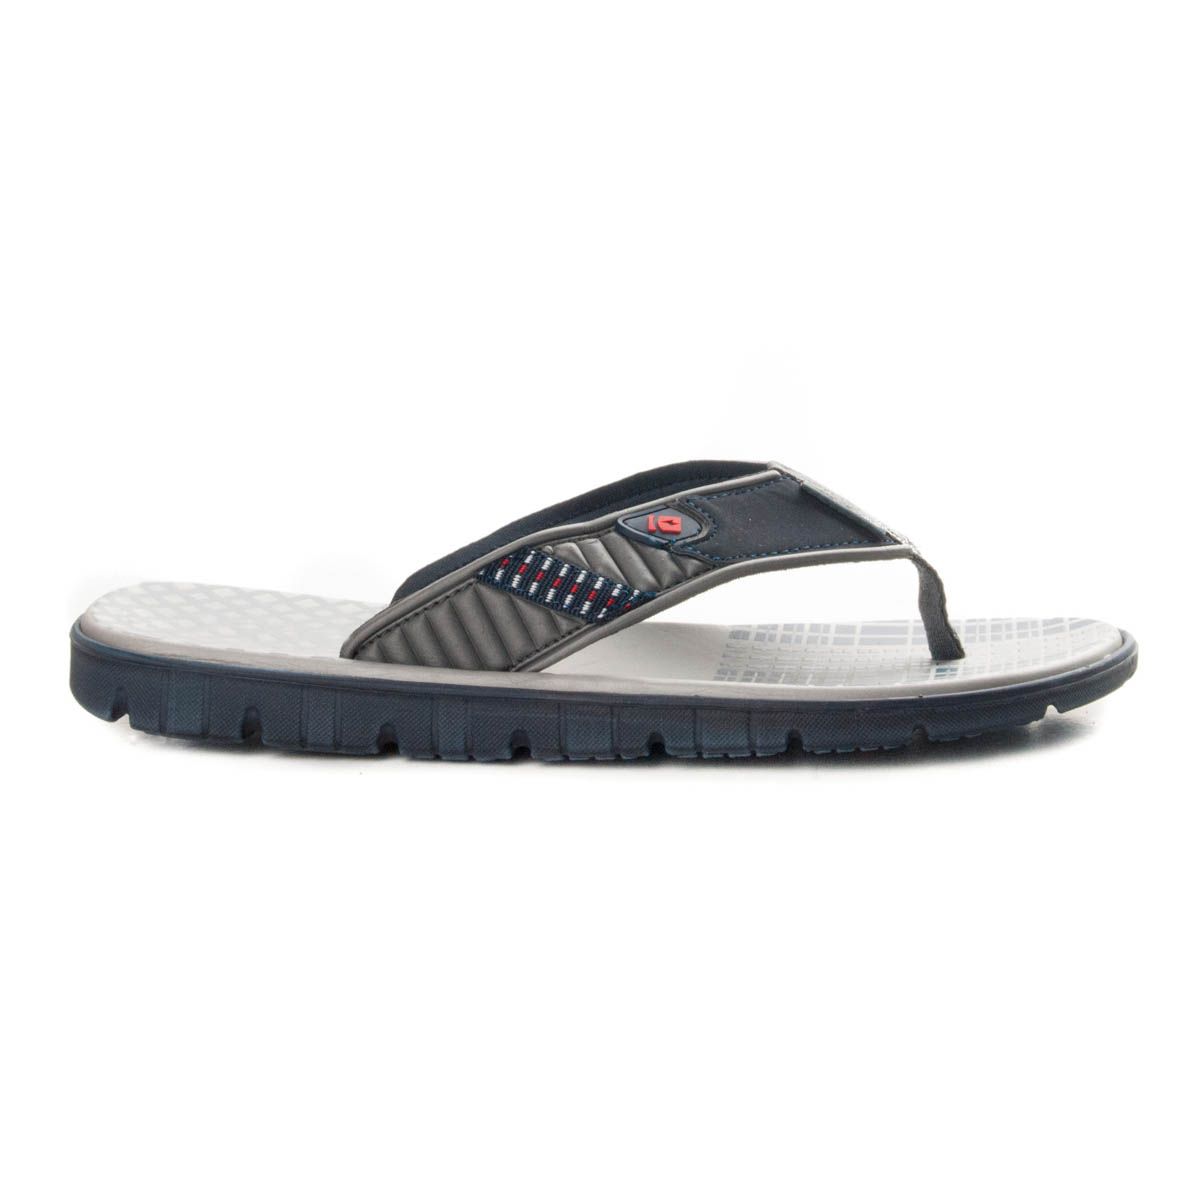 Capsula collection, summer 2019, by Nicoboco. Flip flops, comfortable and flexible man t-shirts. Rubber sole, with finger fastening, great adaptability. Current style, and very summer